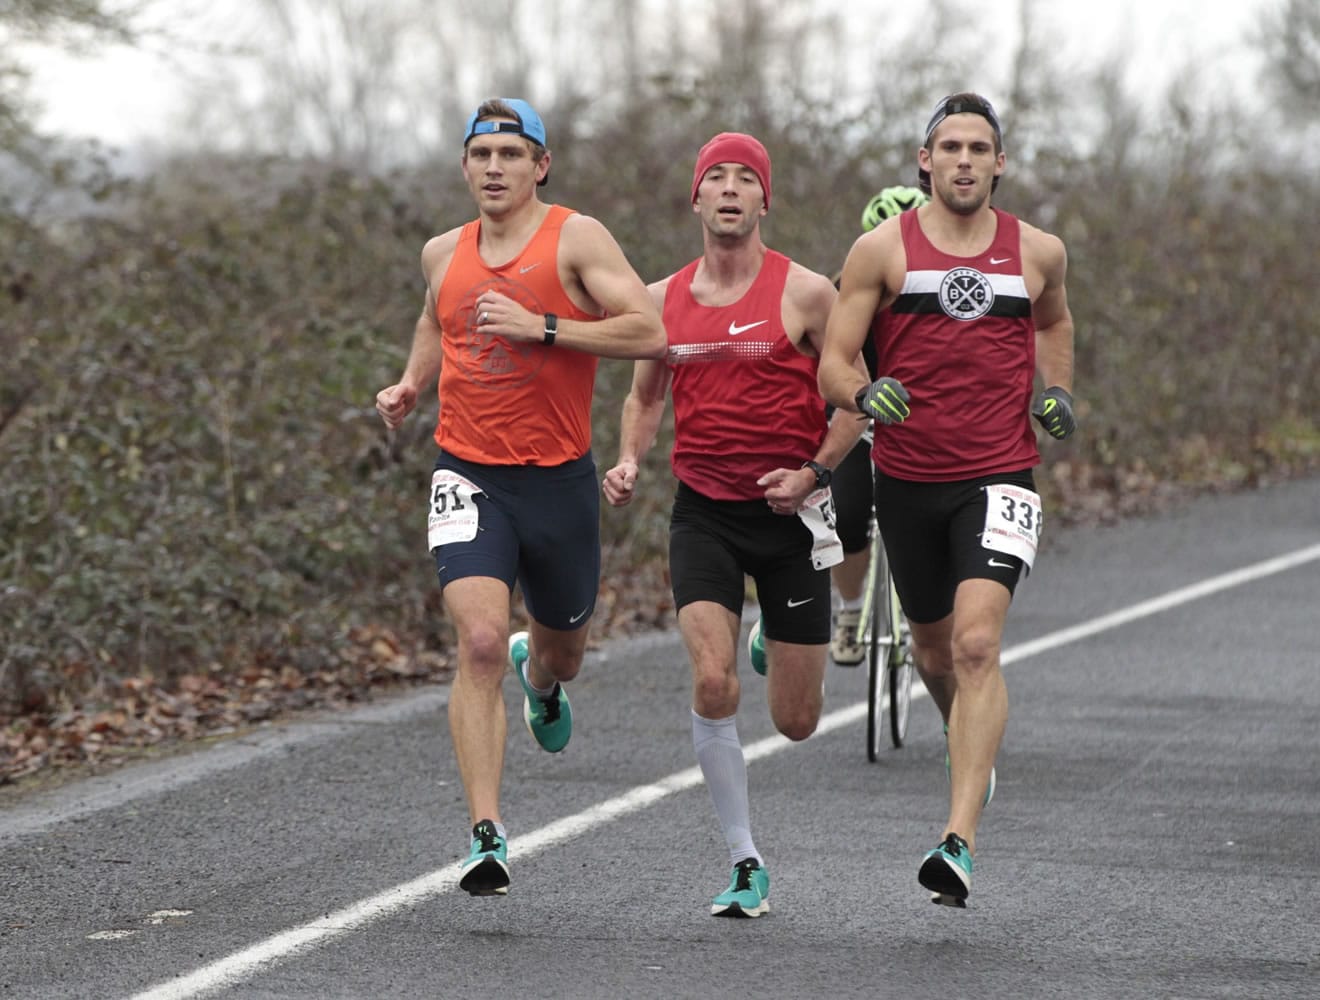 Left to right, Patrick Reaves, Peter Bromka, and Chris Platano run together at the Vancouver Lake Half Marathon.